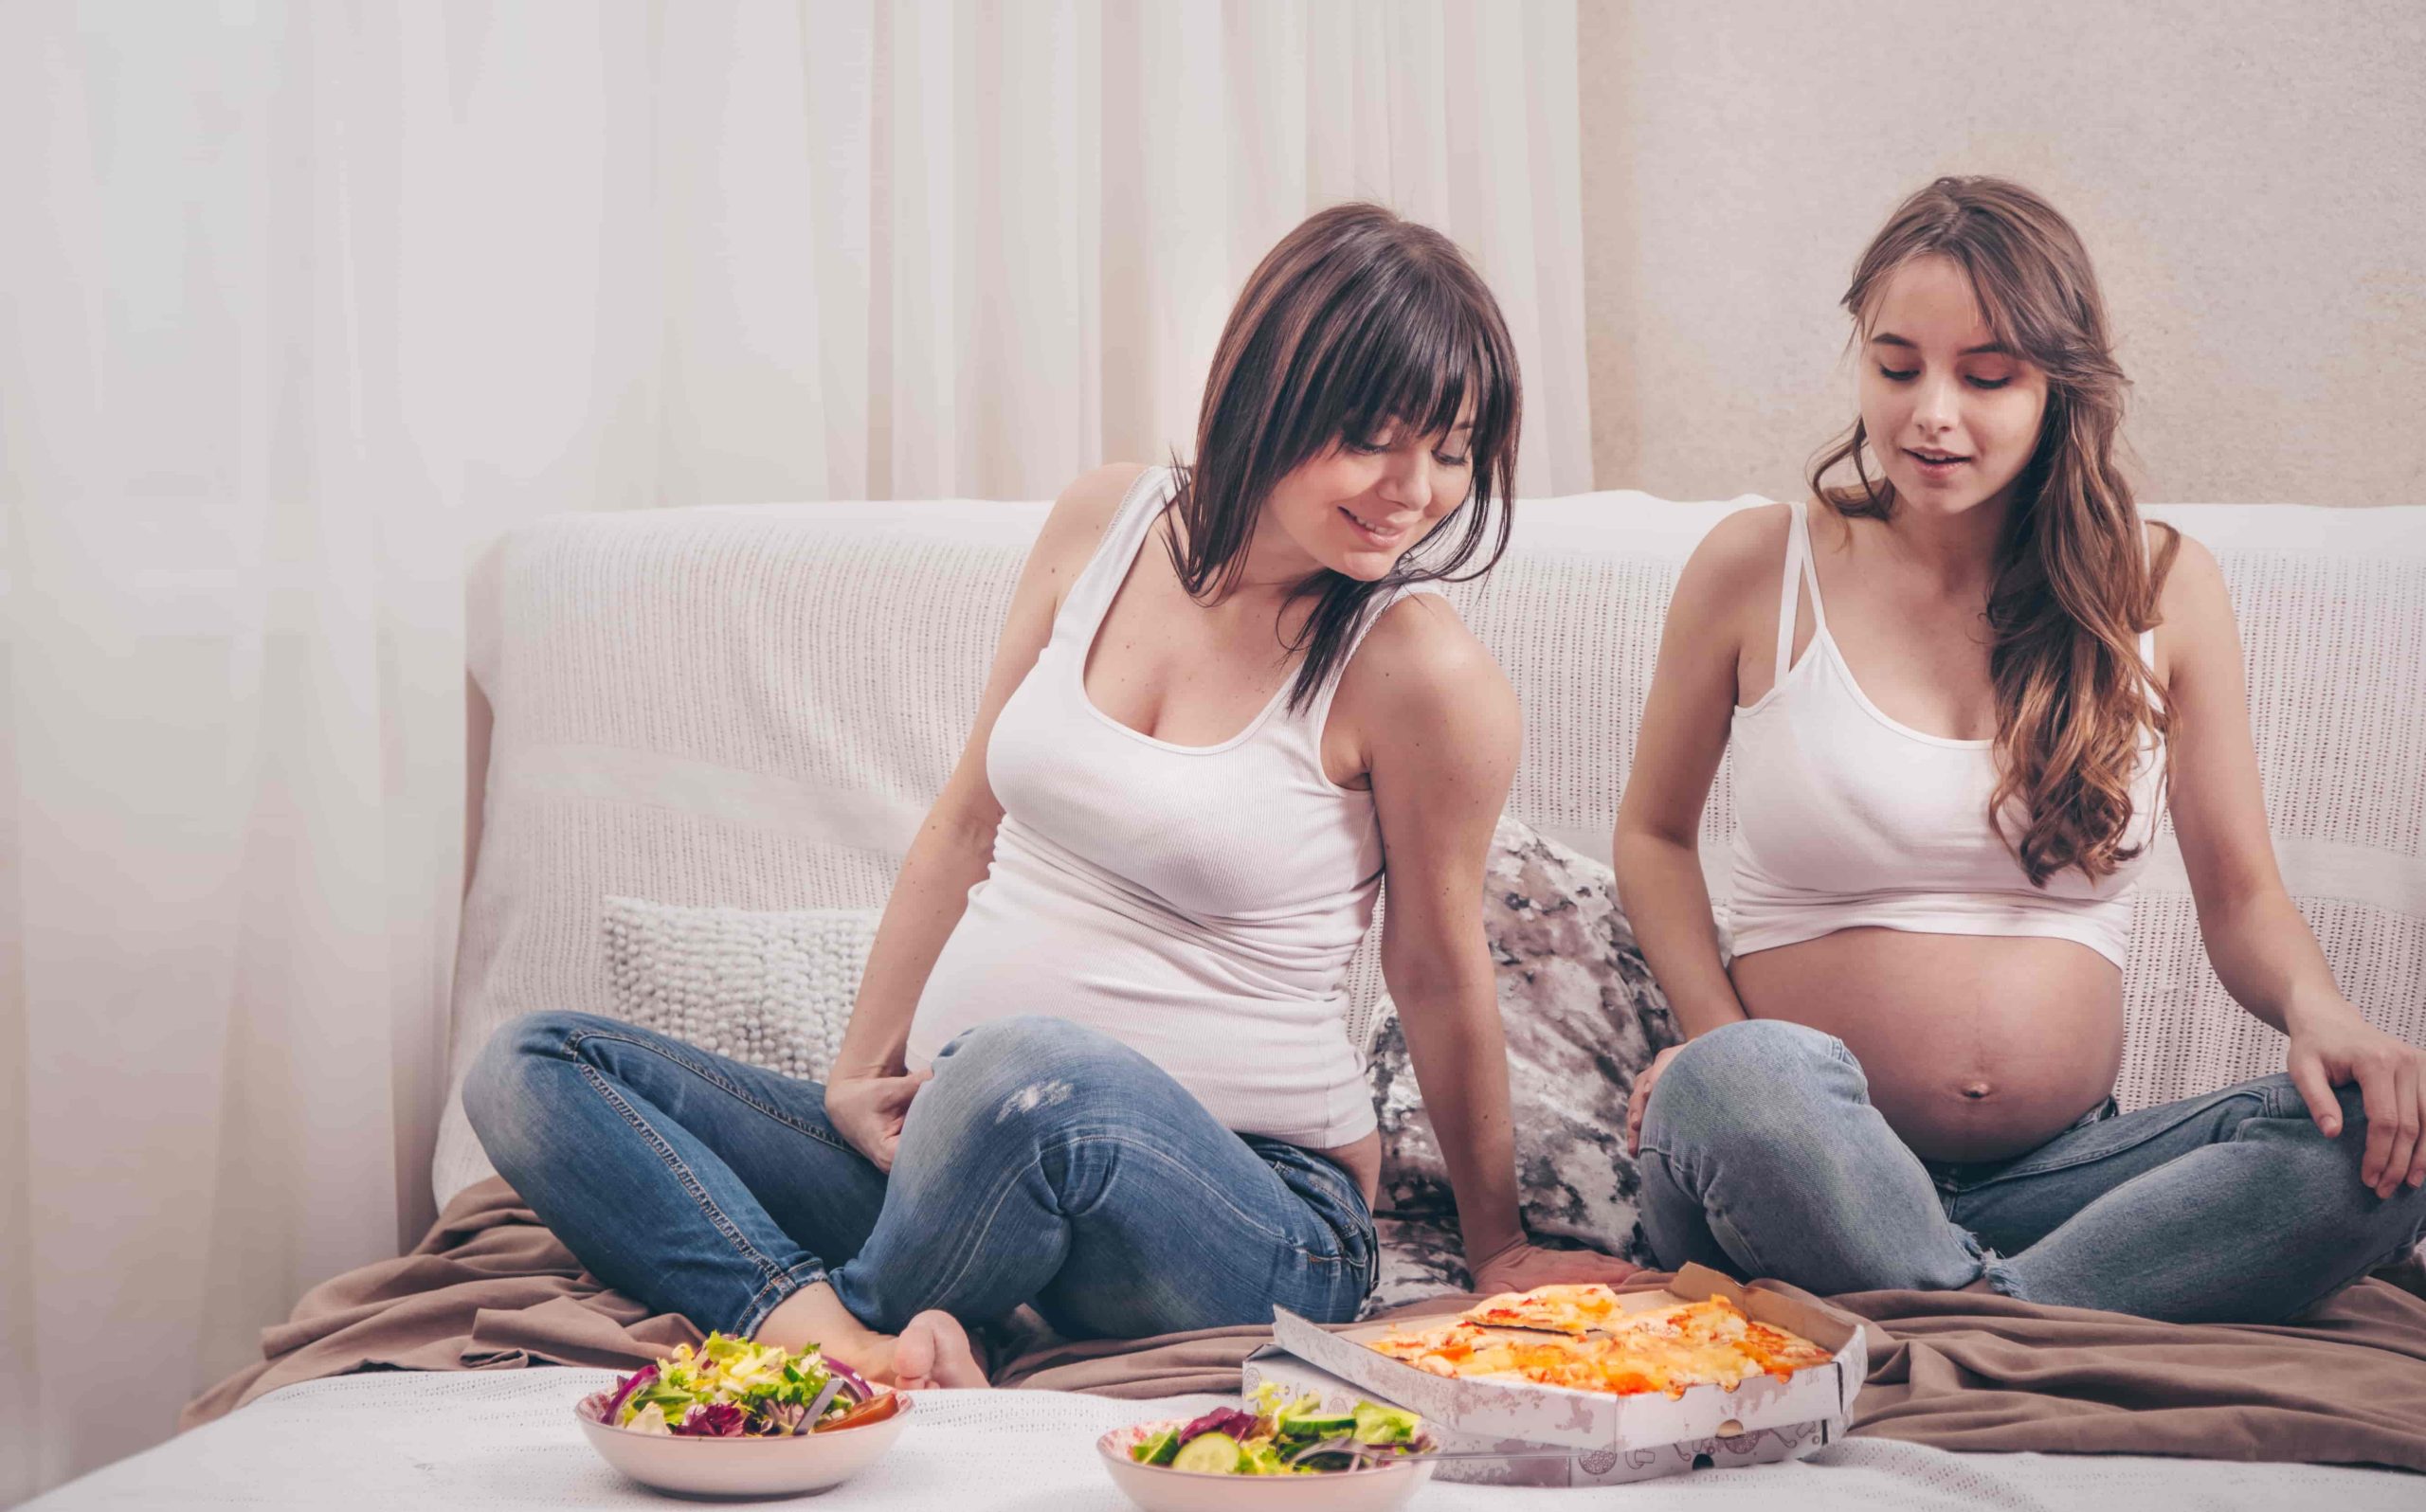 What causes pregnancy cravings?